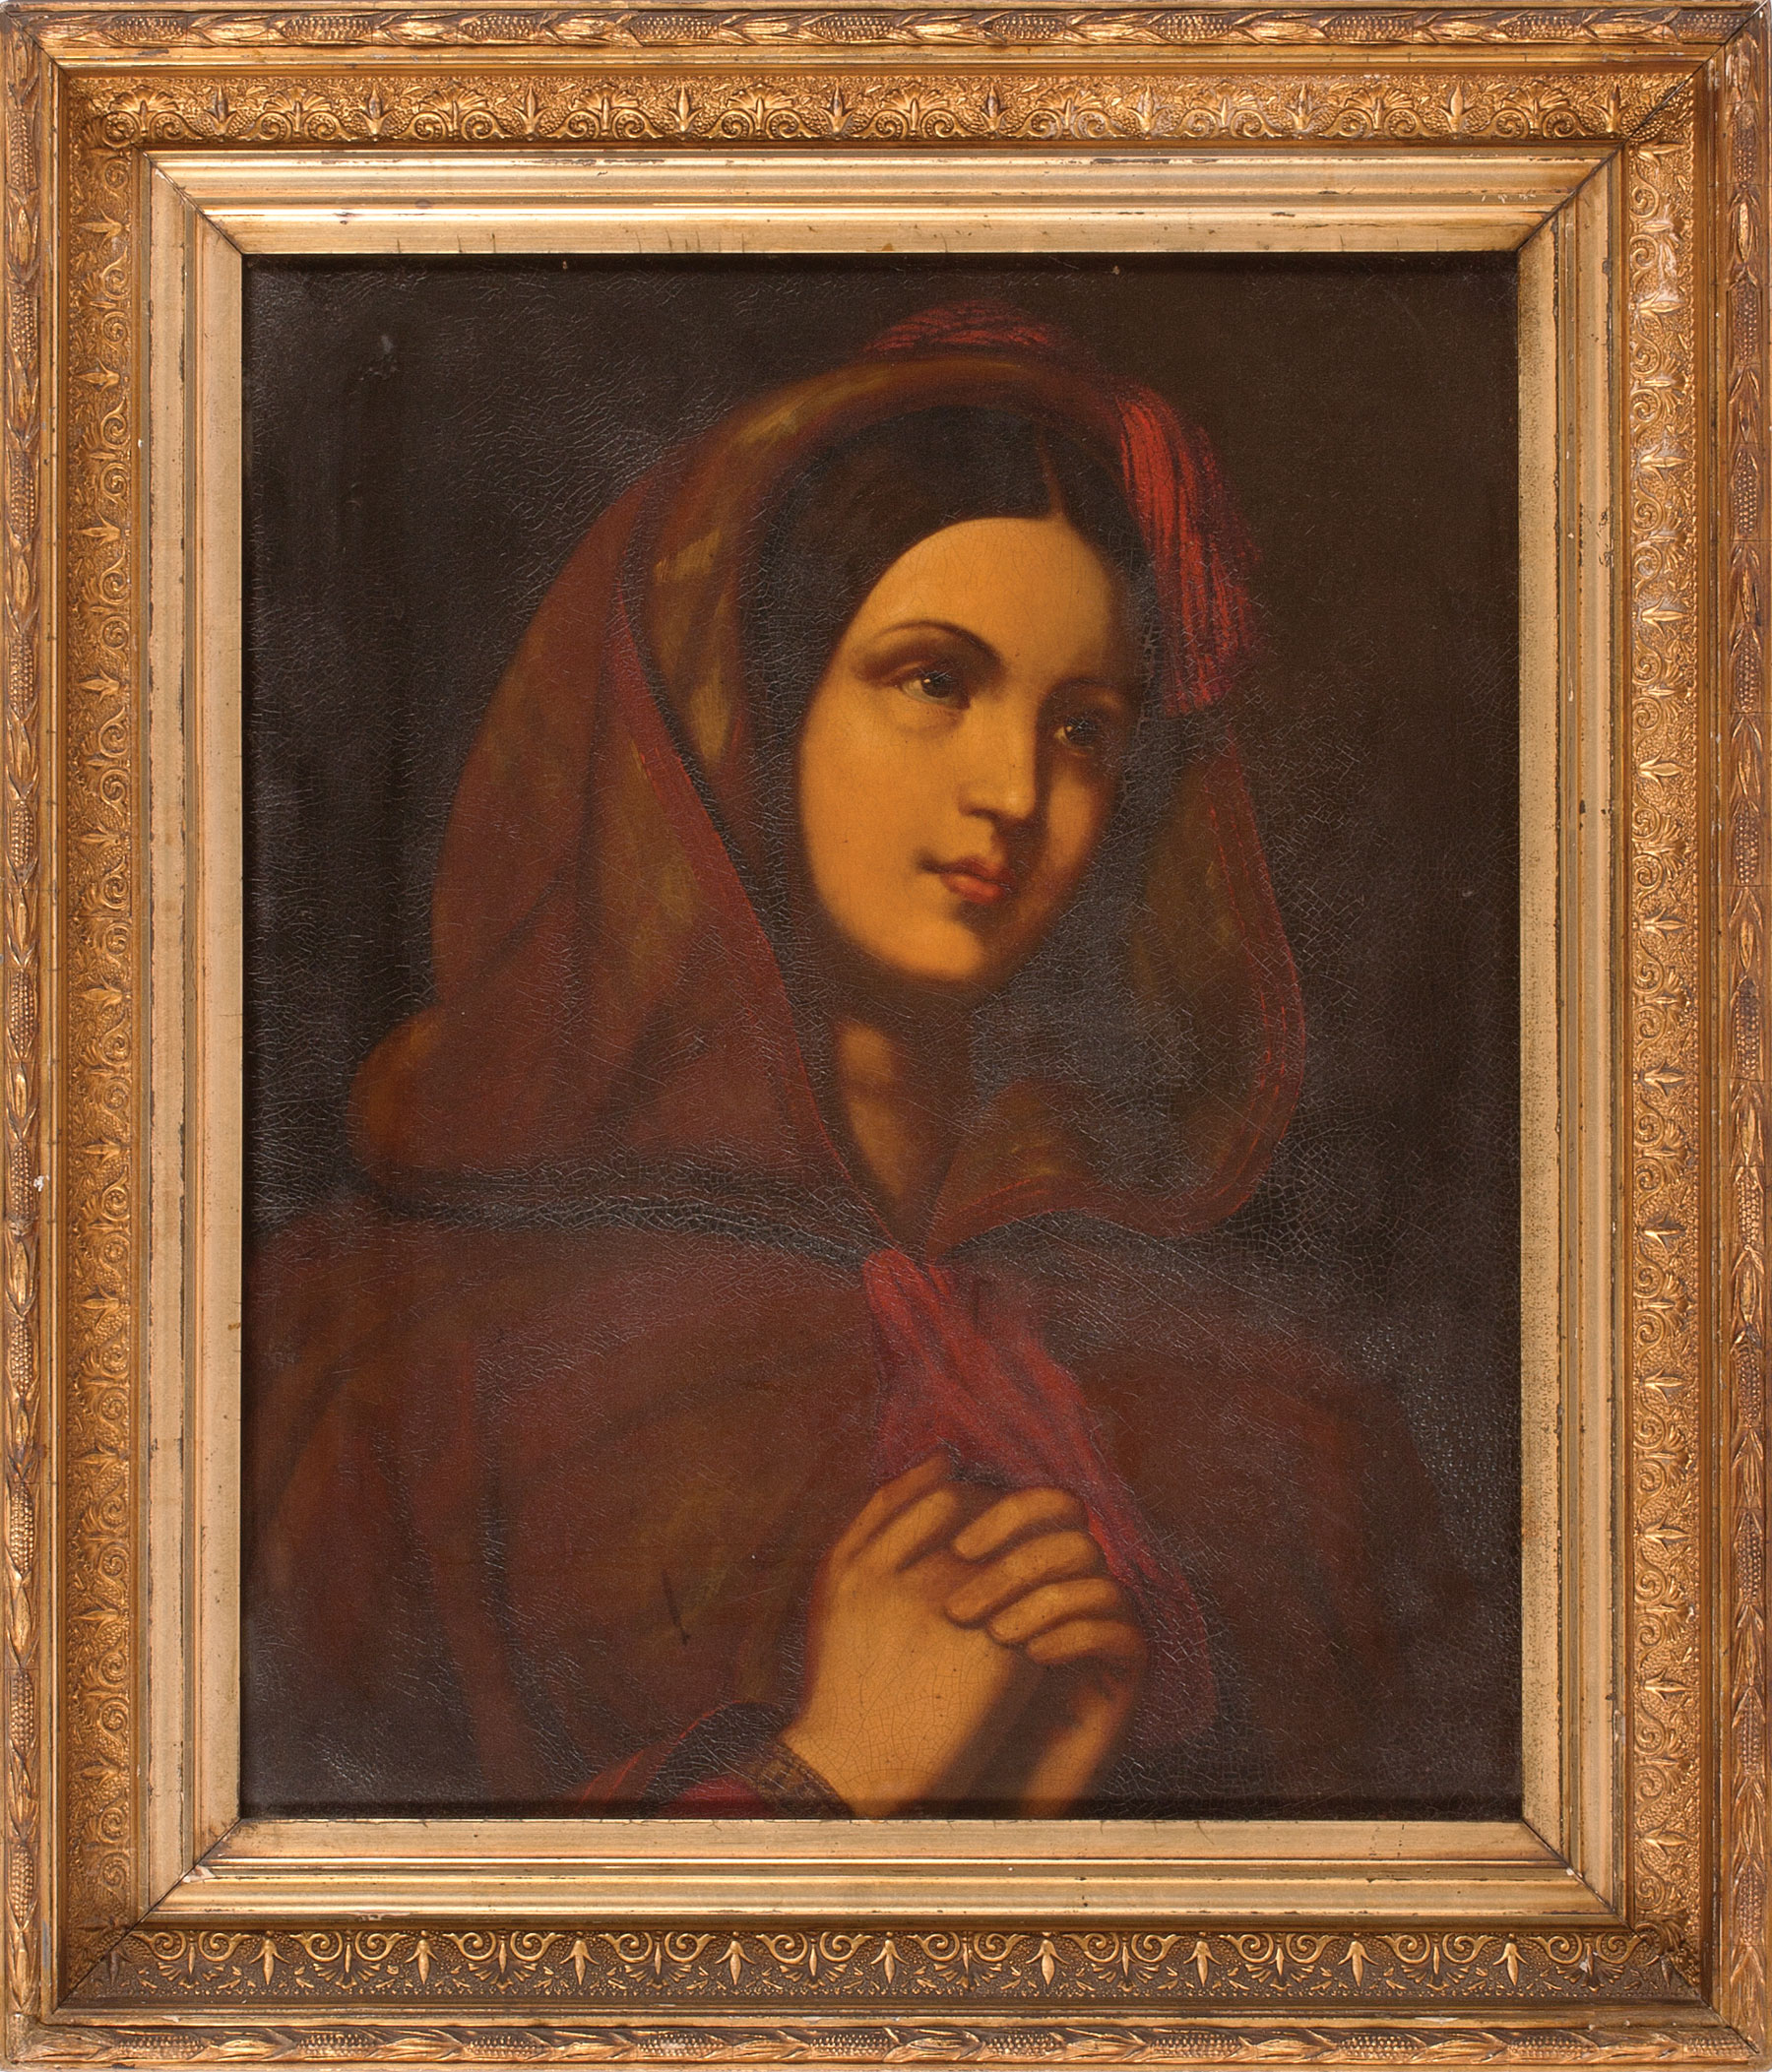 Continental School, 19th c ., "Woman in Adoration", oil on metal, unsigned, 19 in. x 15 1/4 in.,